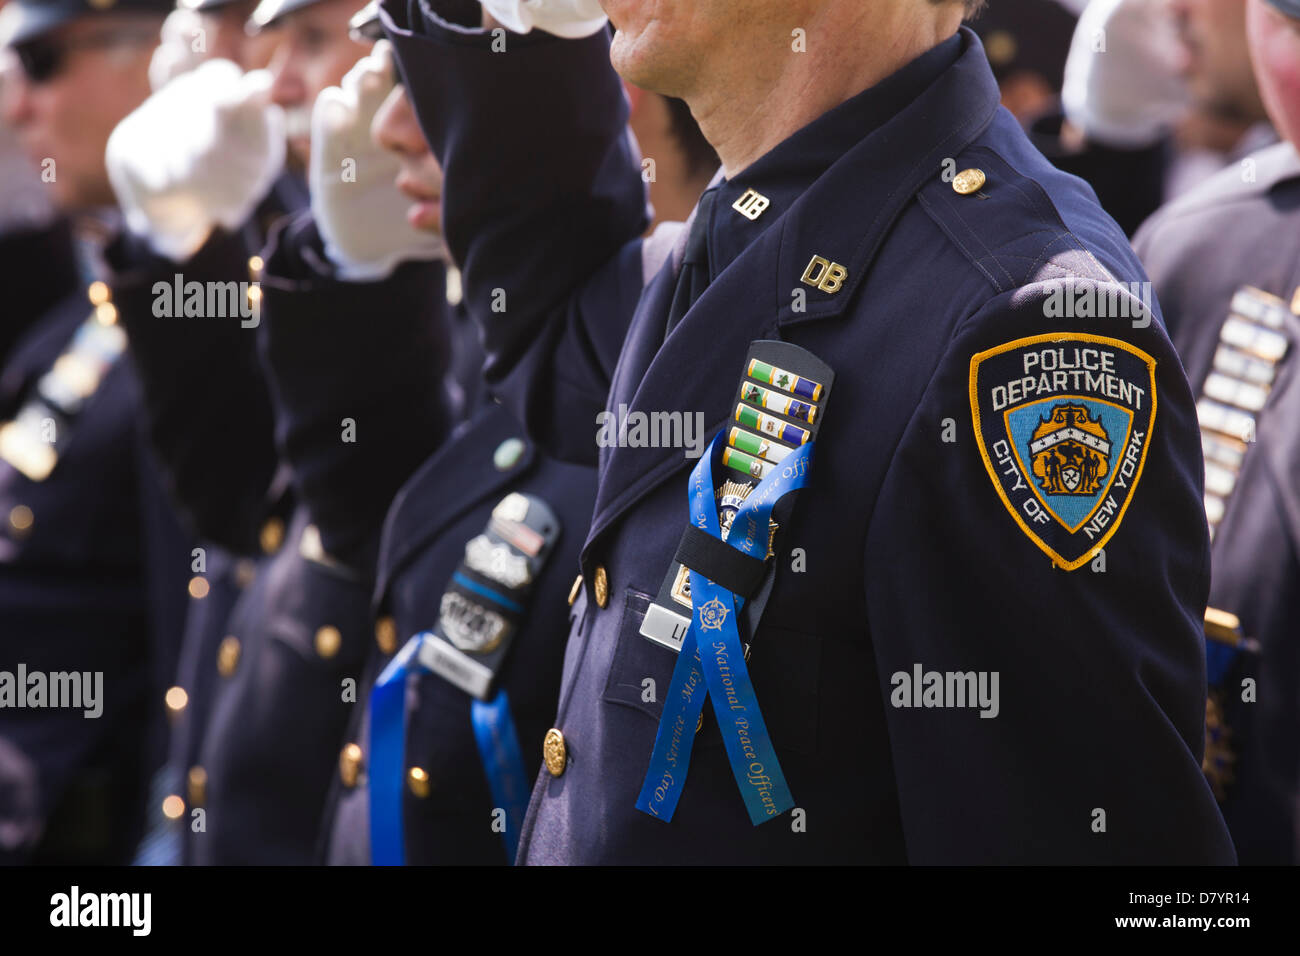 NYPD police officers salute during Police Week 2013 - Washington, DC USA Stock Photo